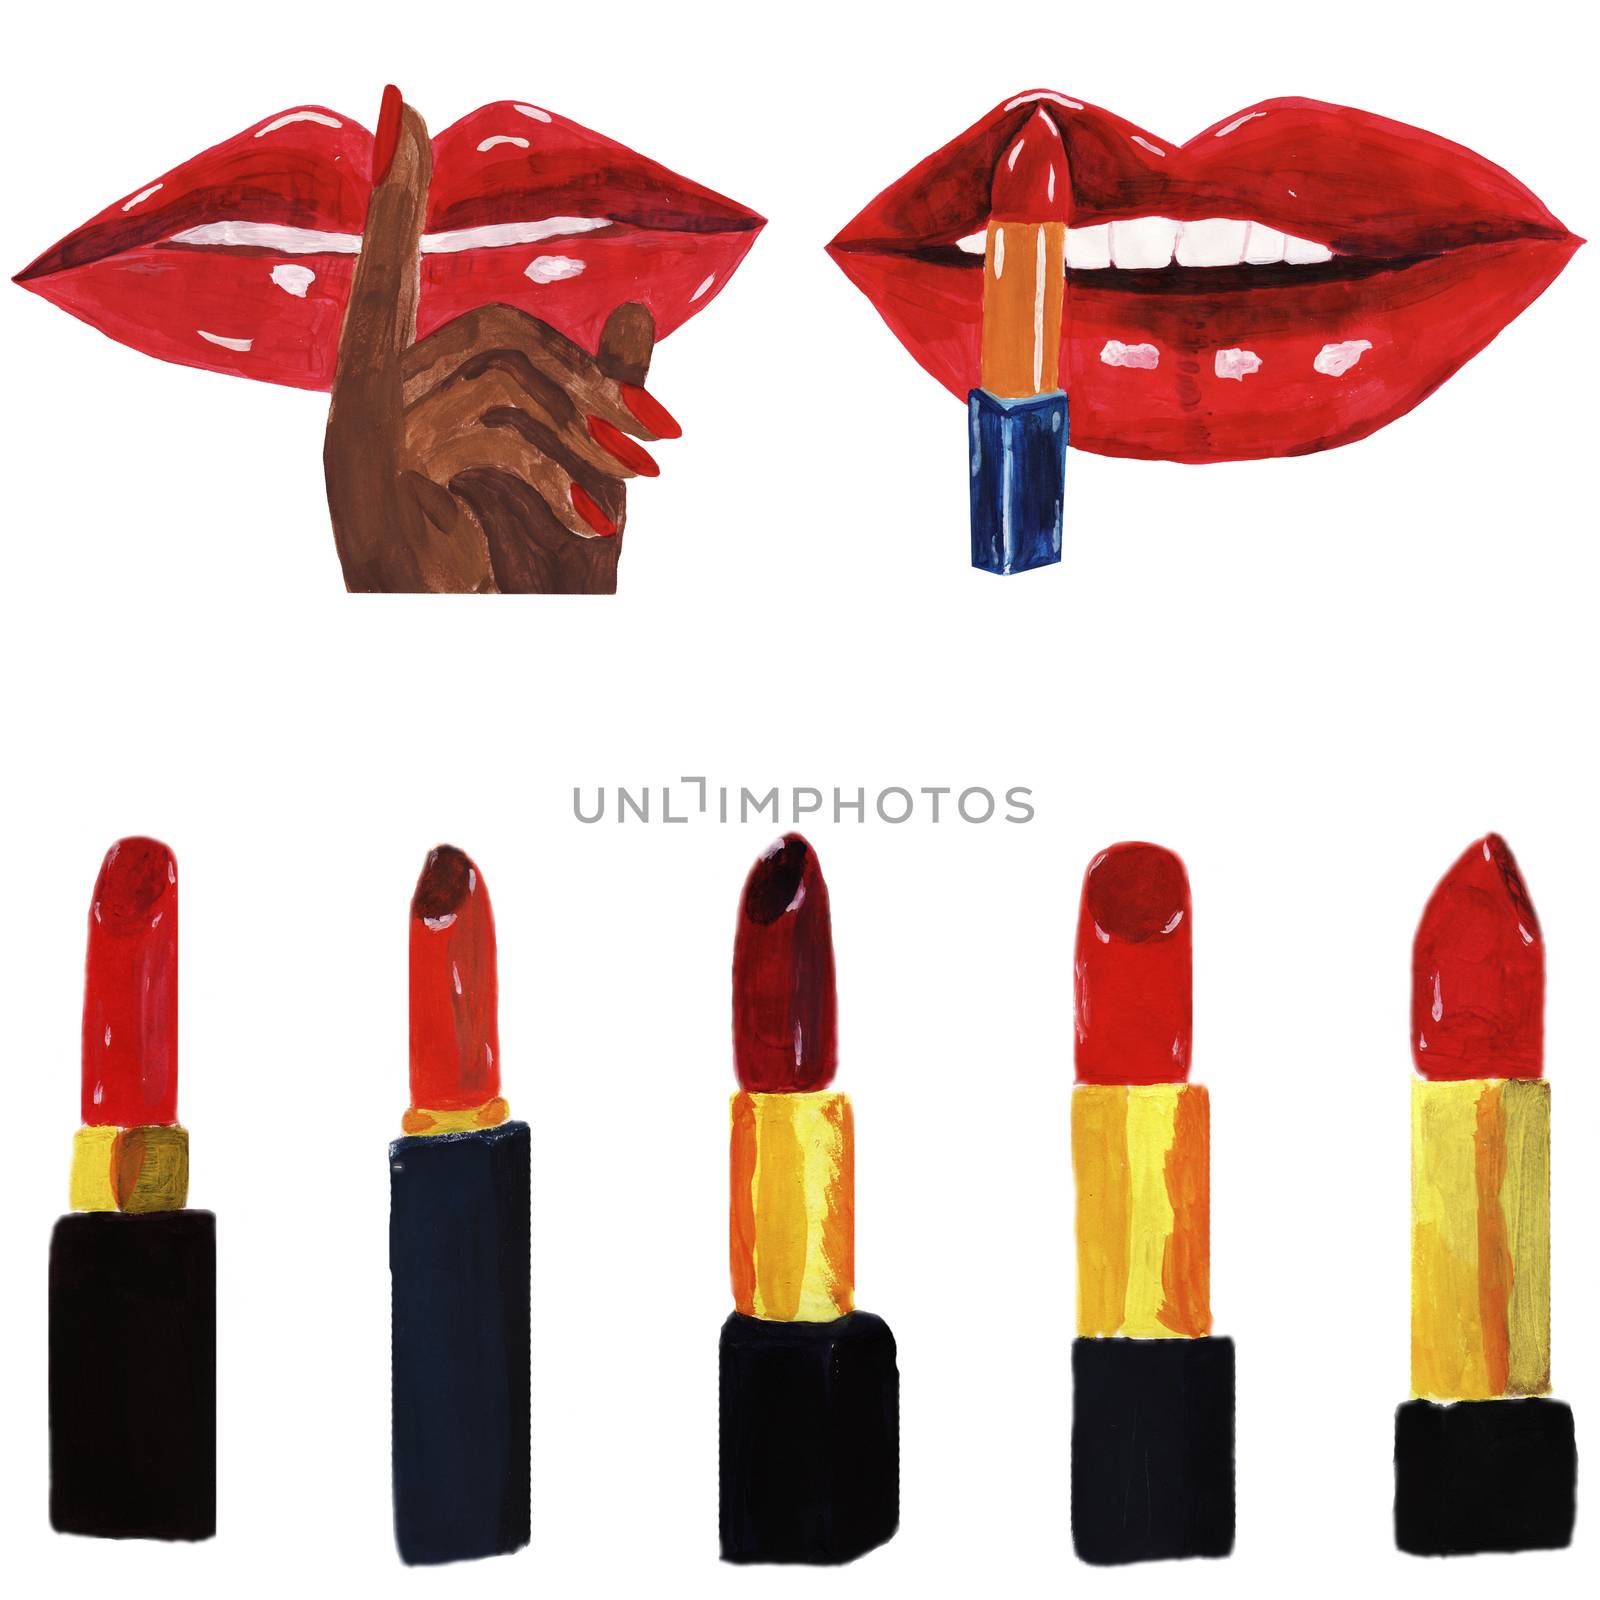 Red lipstick set isolated on white background. Red lips with lipstick applied. Make up set decor design for print, poster, t shirt, card.